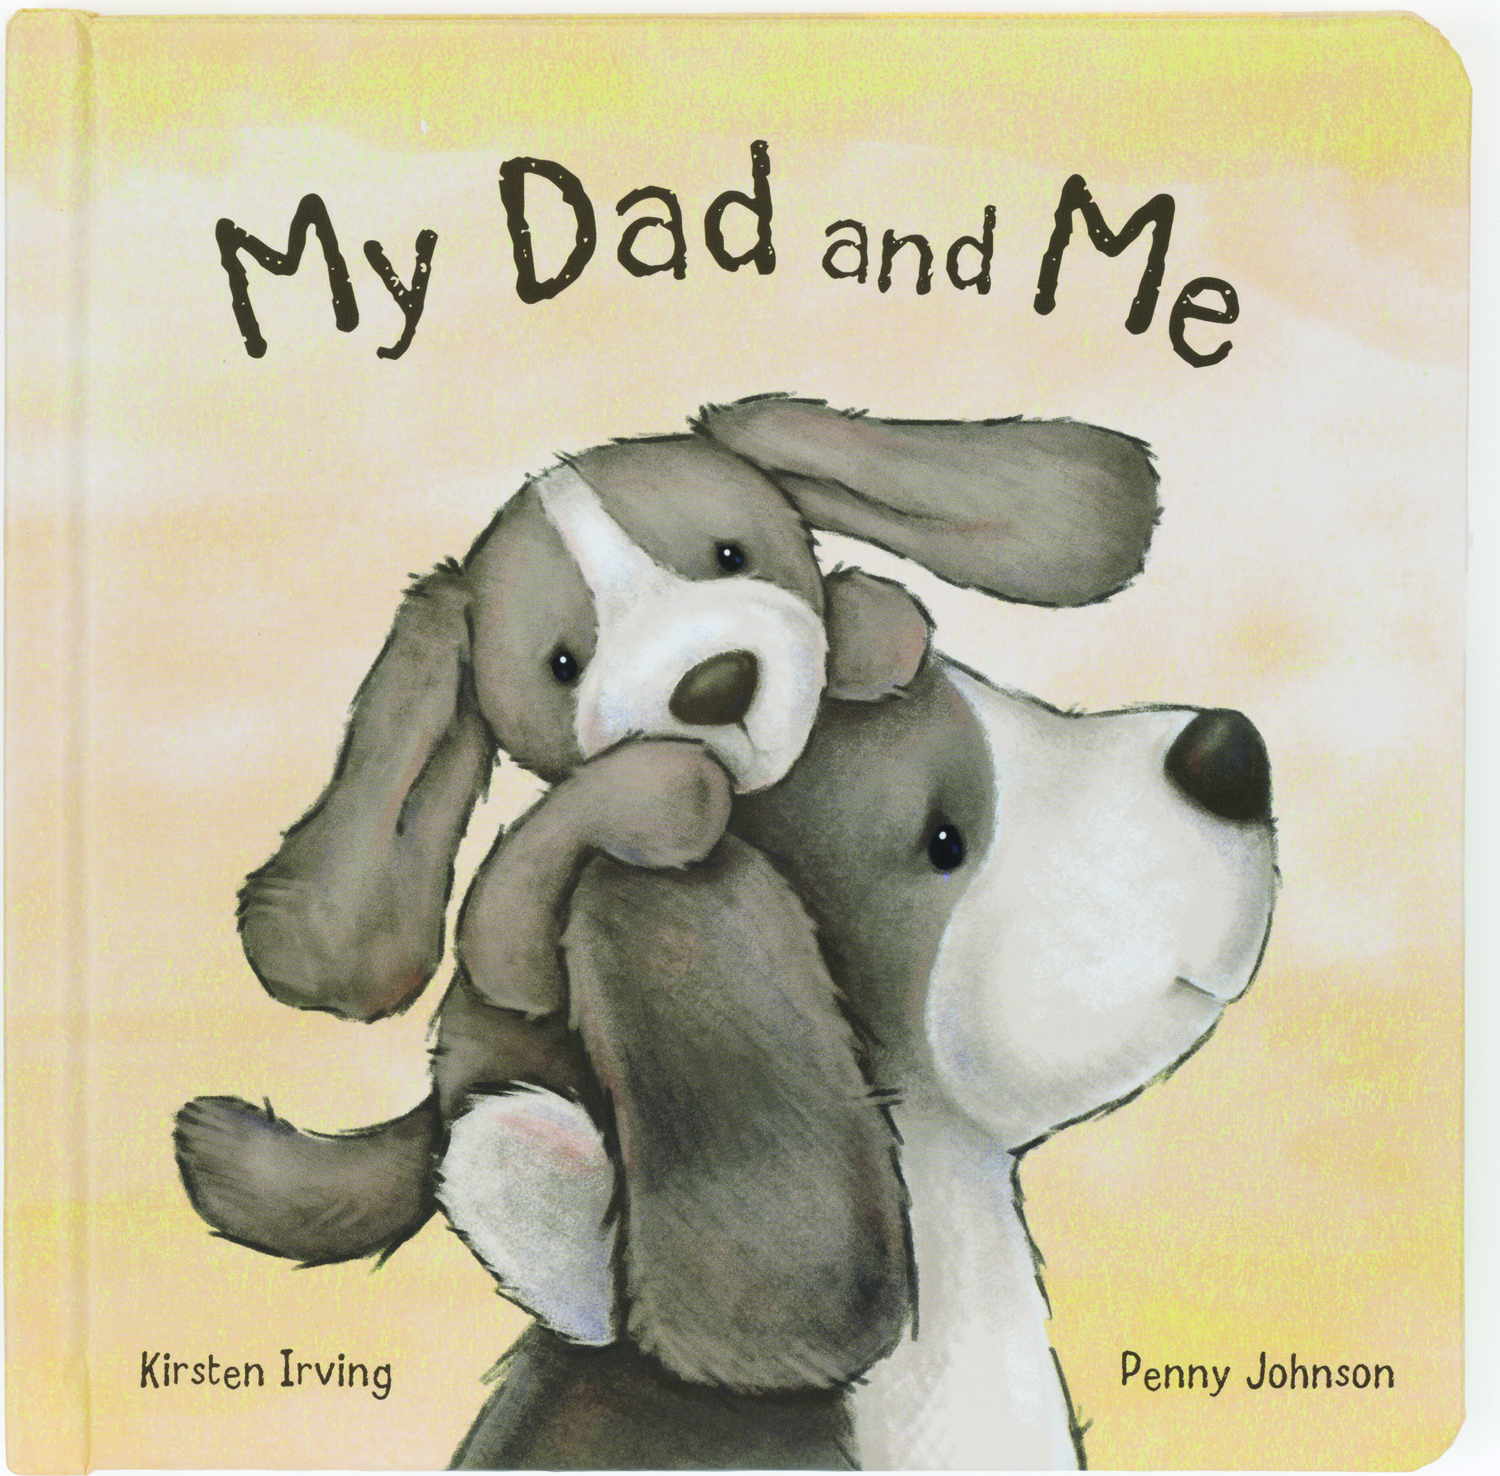 Daddy And Me Book